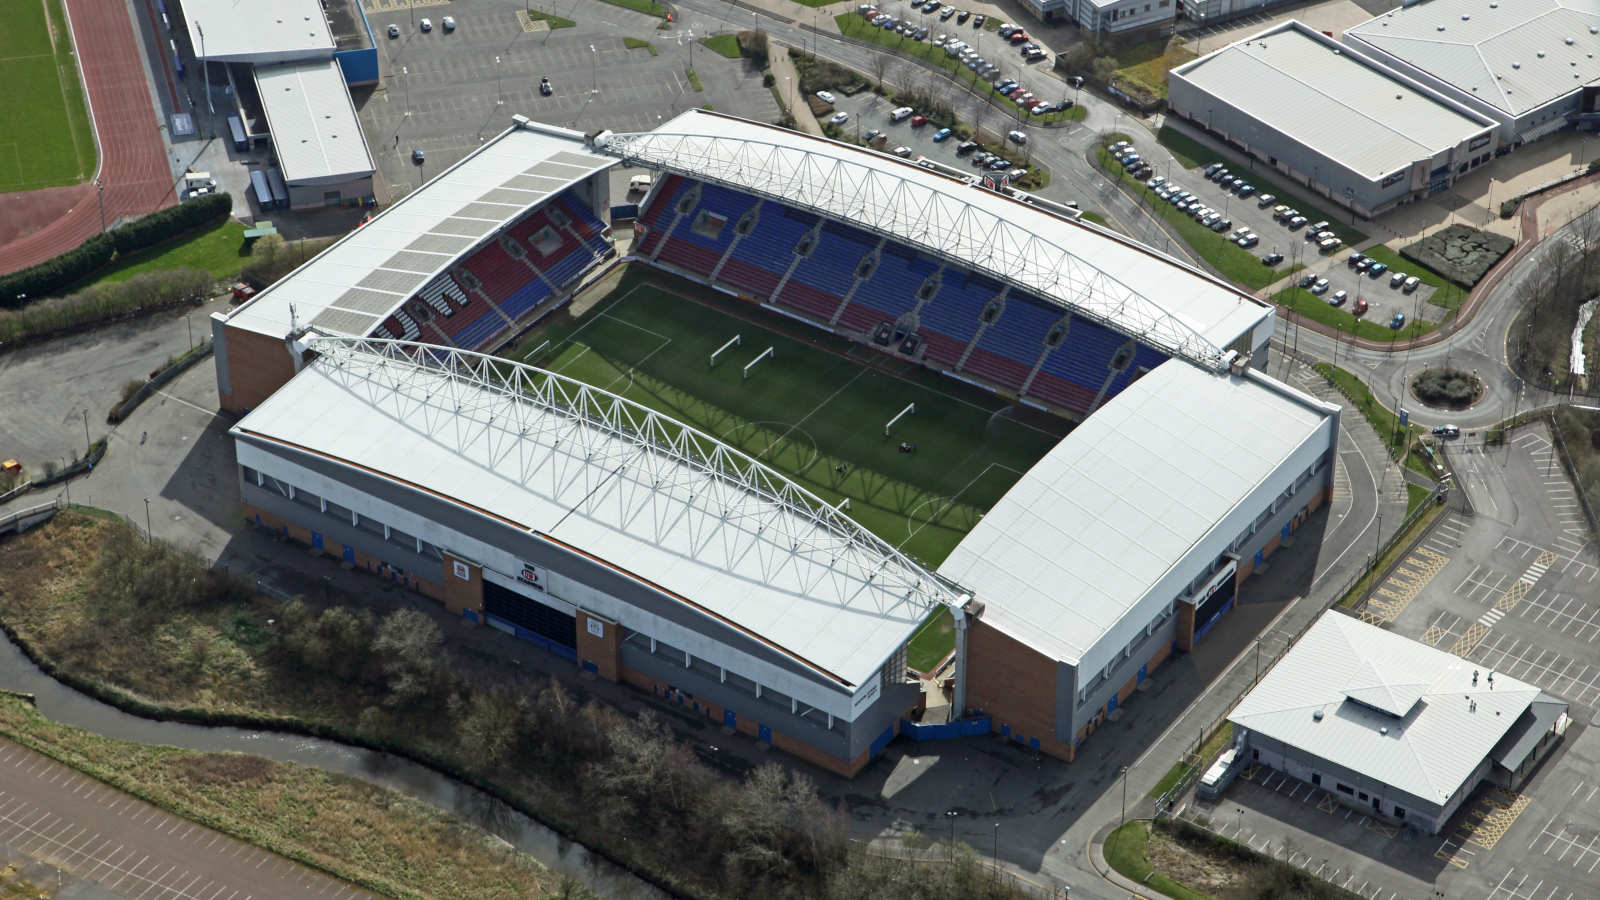 The DW Satdium, home of League One club Wigan Athletic